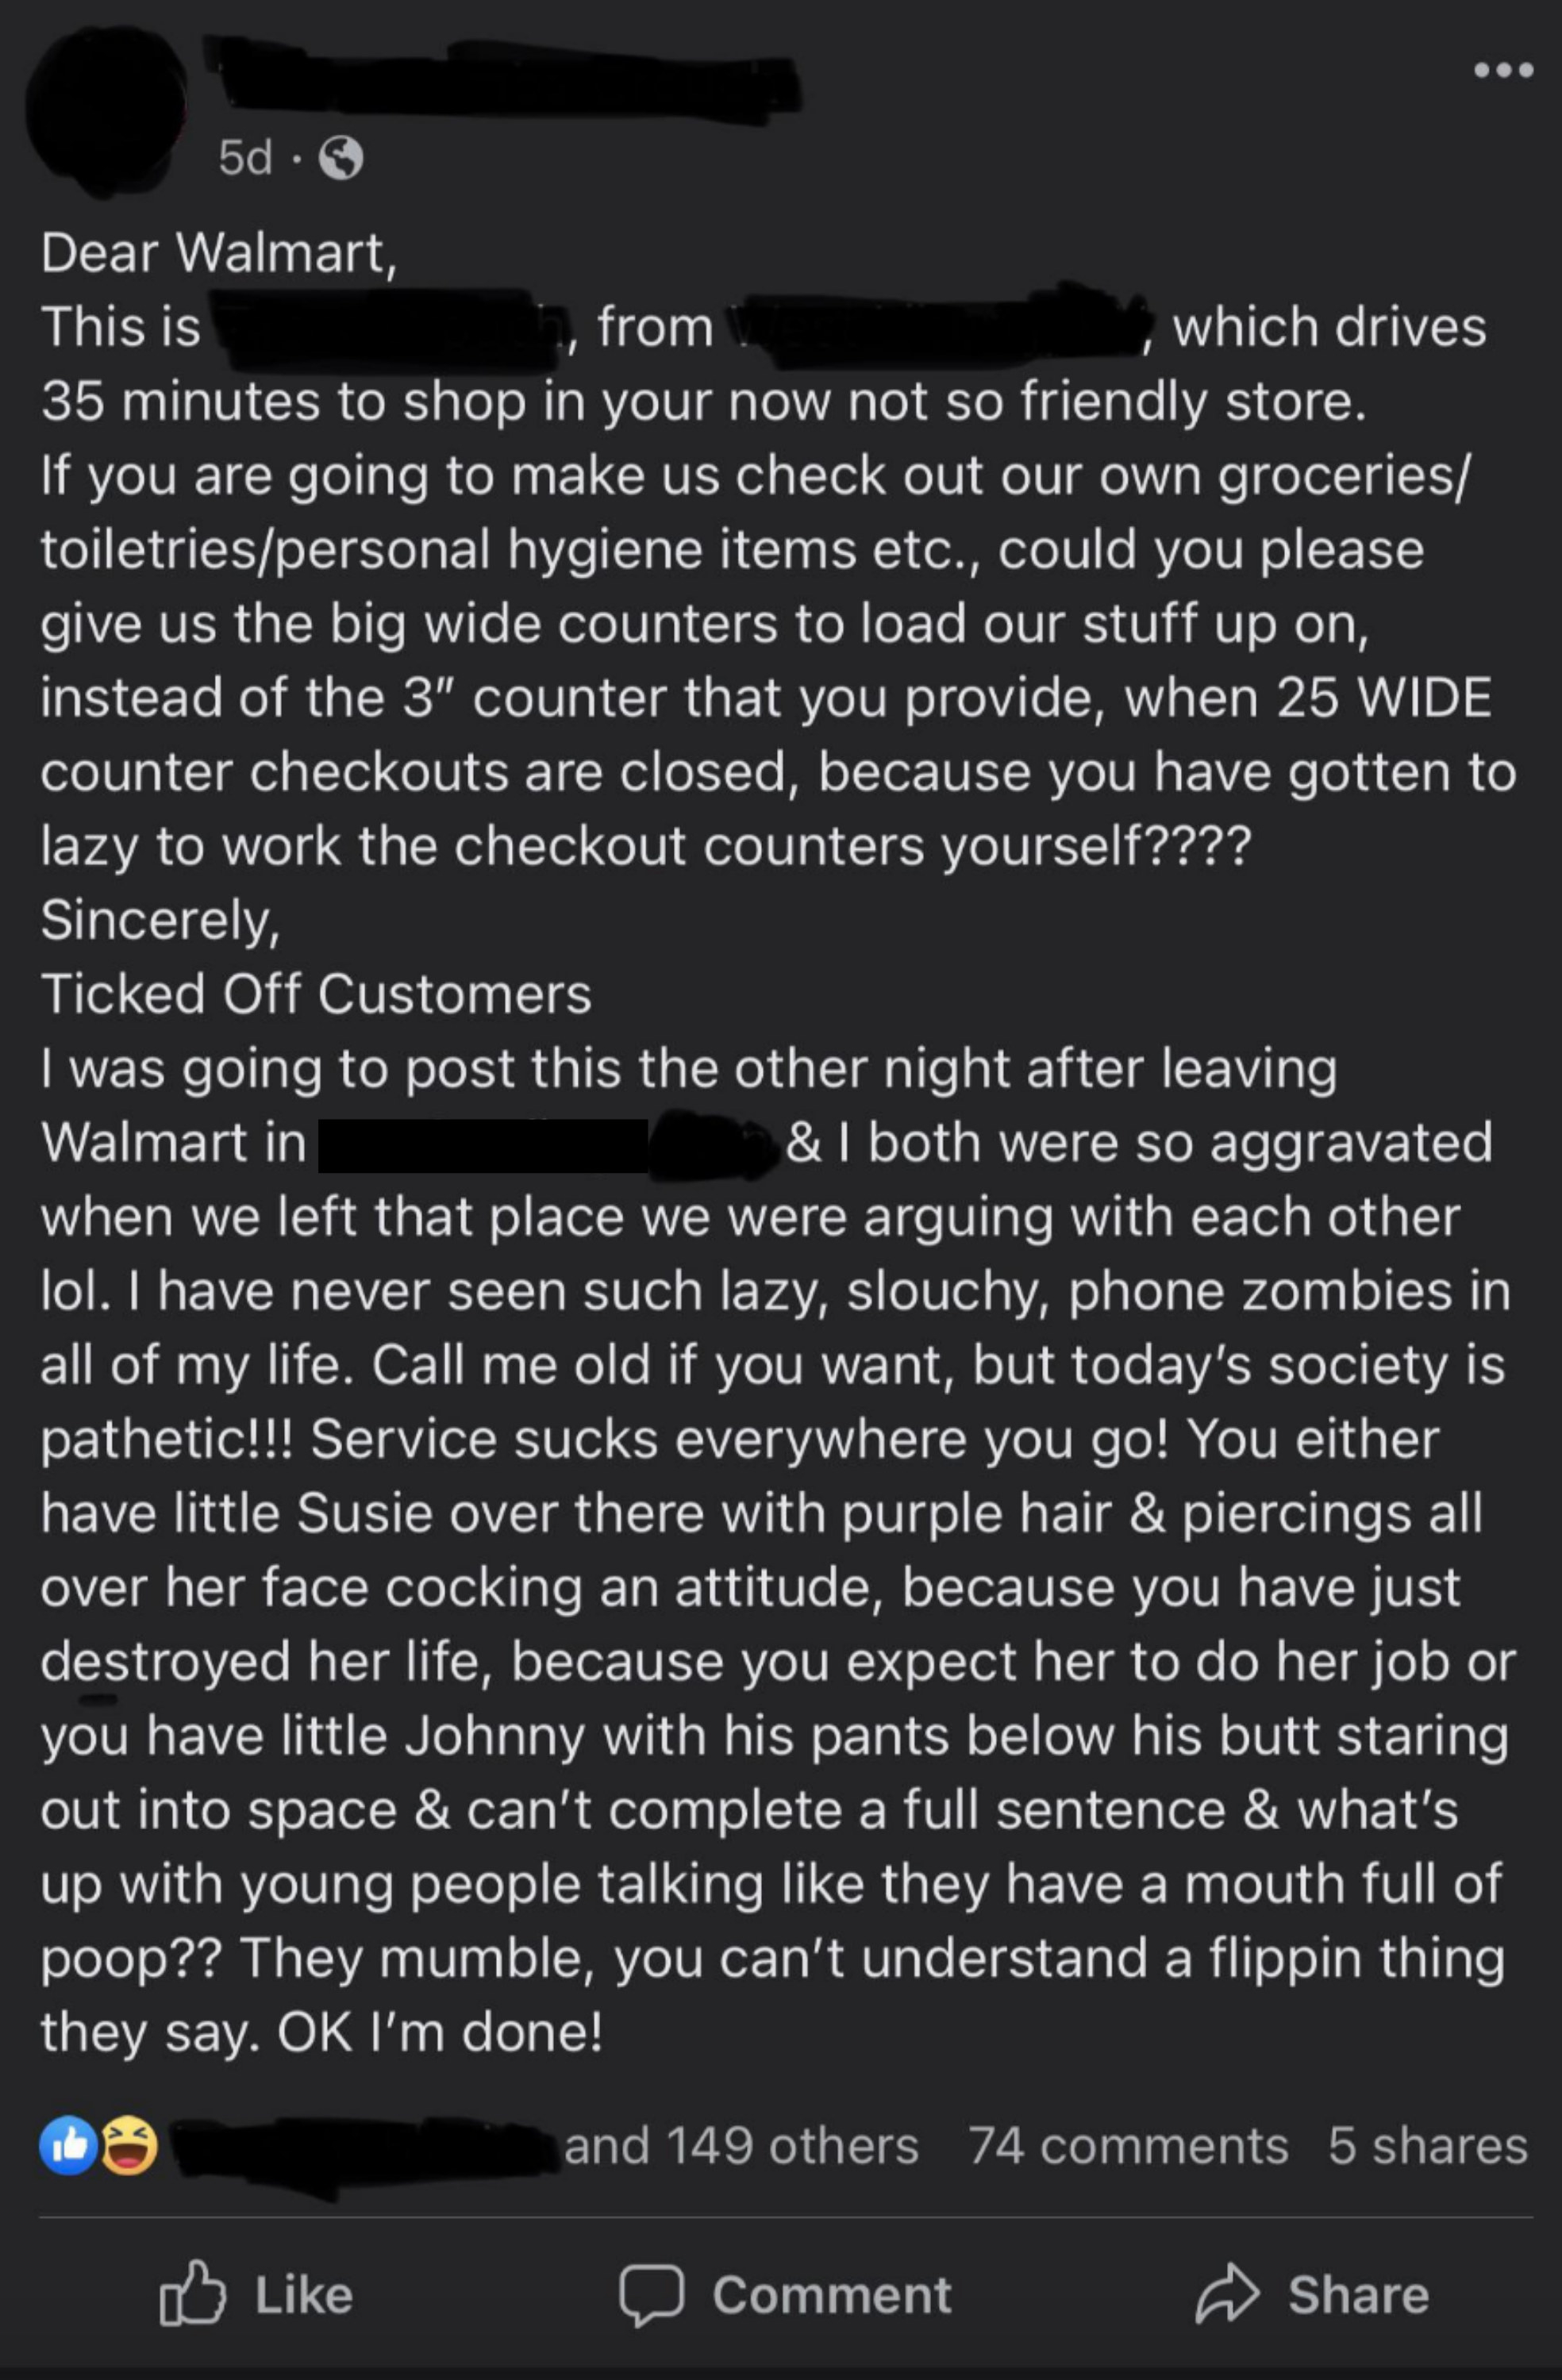 Very long rant at Walmart for narrow self-checkout counters and &quot;lazy, slouchy zombies,&quot; like &quot;little Susie with purple hair &amp;amp; piercings&quot; w/an attitude, and &quot;little Johnny with his pants below his butt and can&#x27;t complete a full sentence&quot;